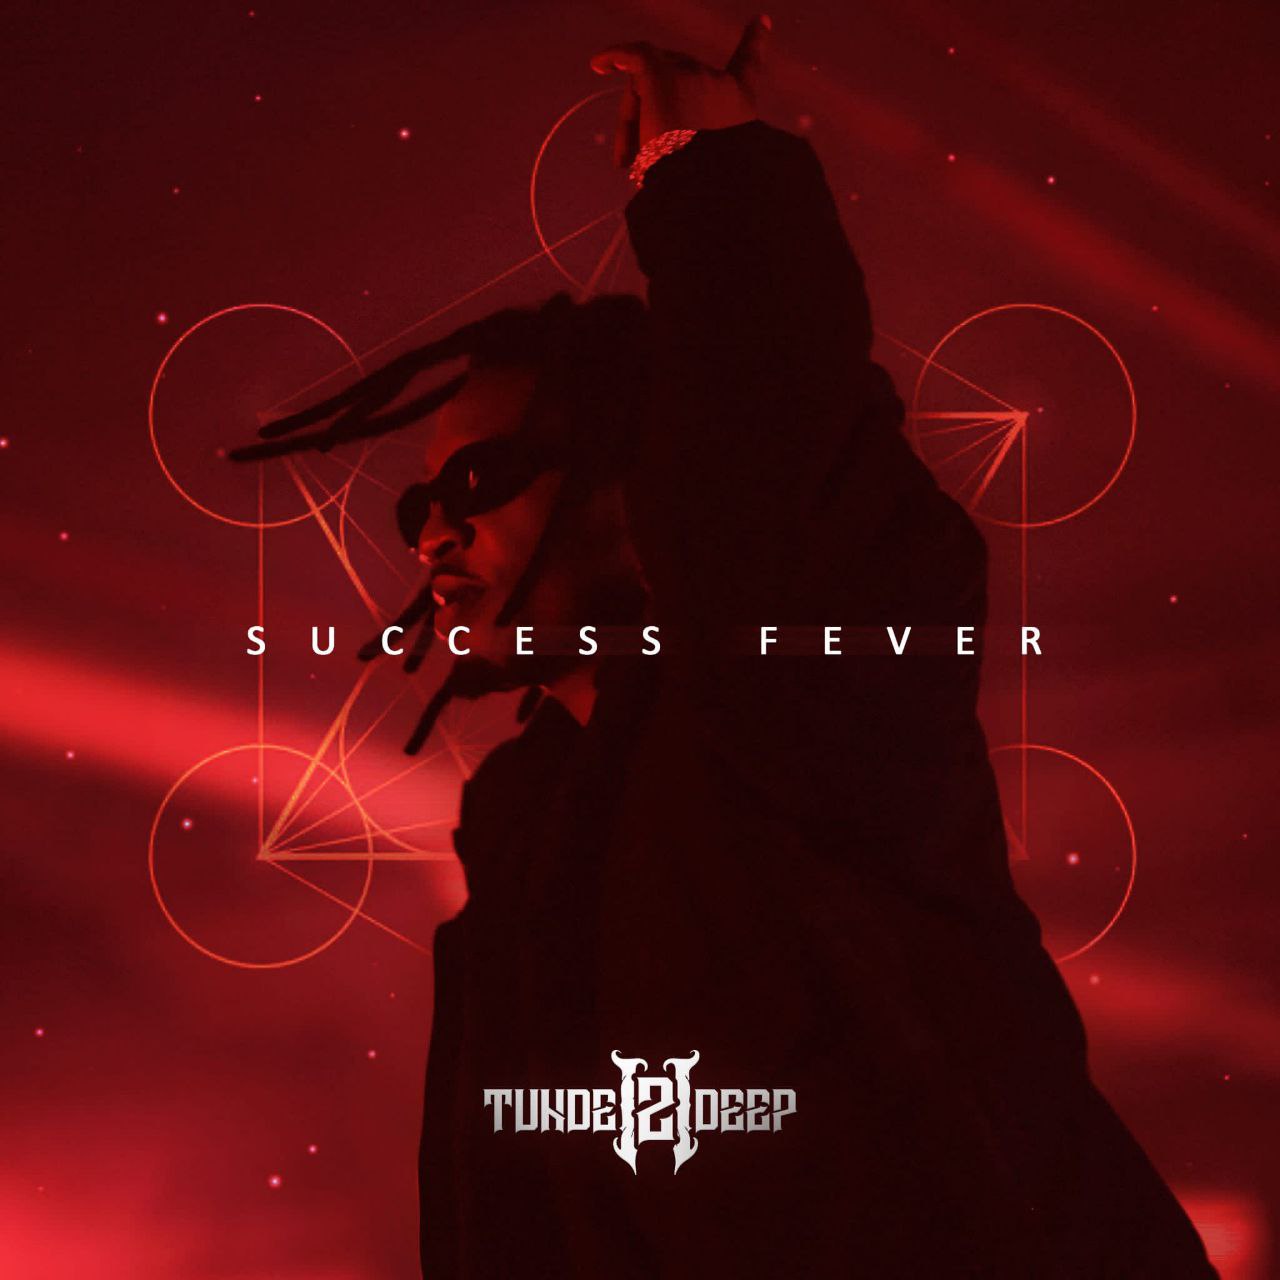 Tunde 2deep came in hot in his Afrobeat EDM hit, SUCCESS FEVER